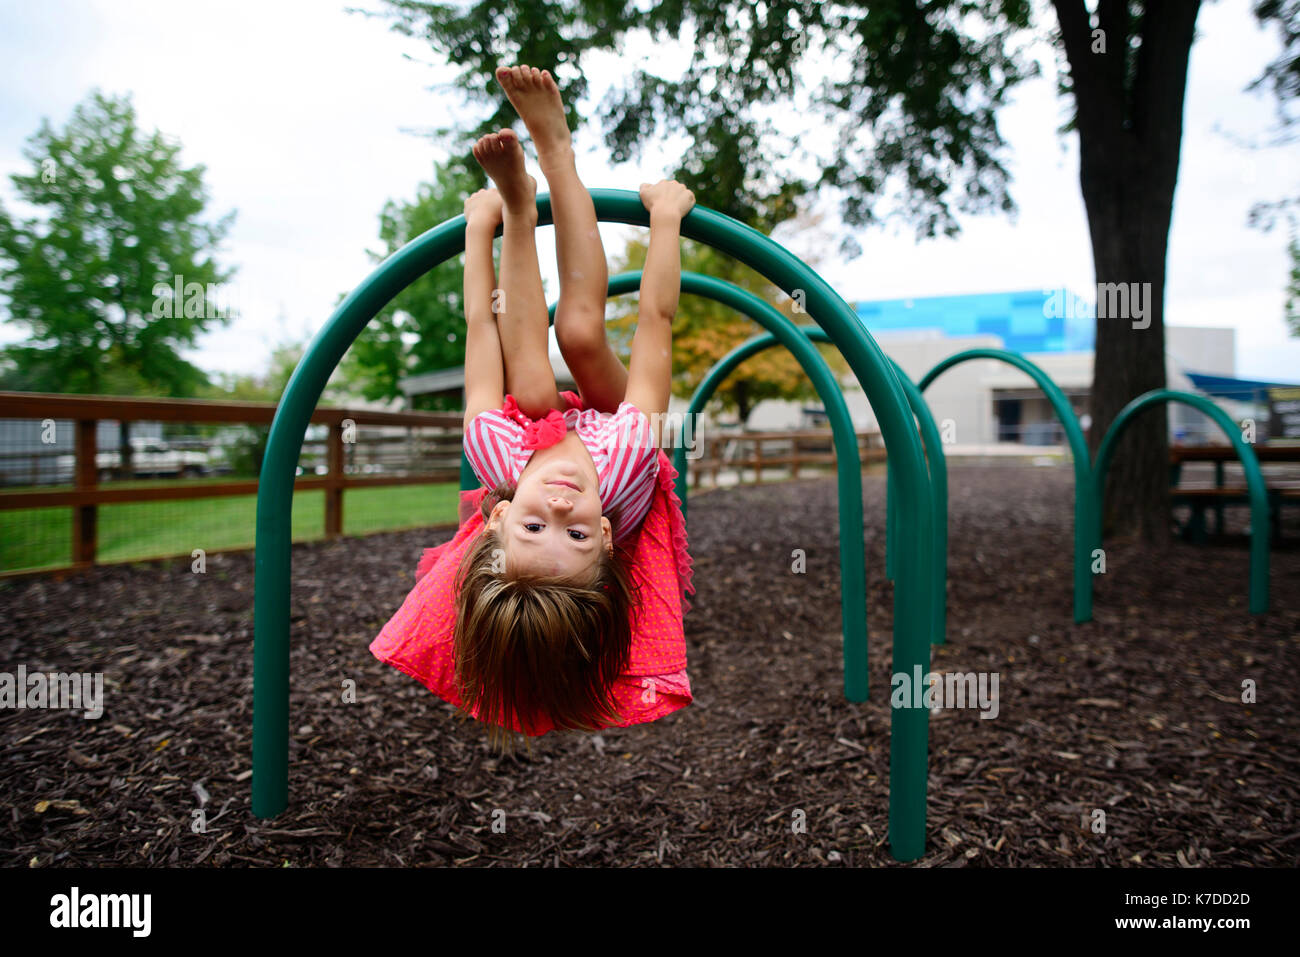 Portrait of girl hanging upside down on outdoor play equipment at playground Stock Photo